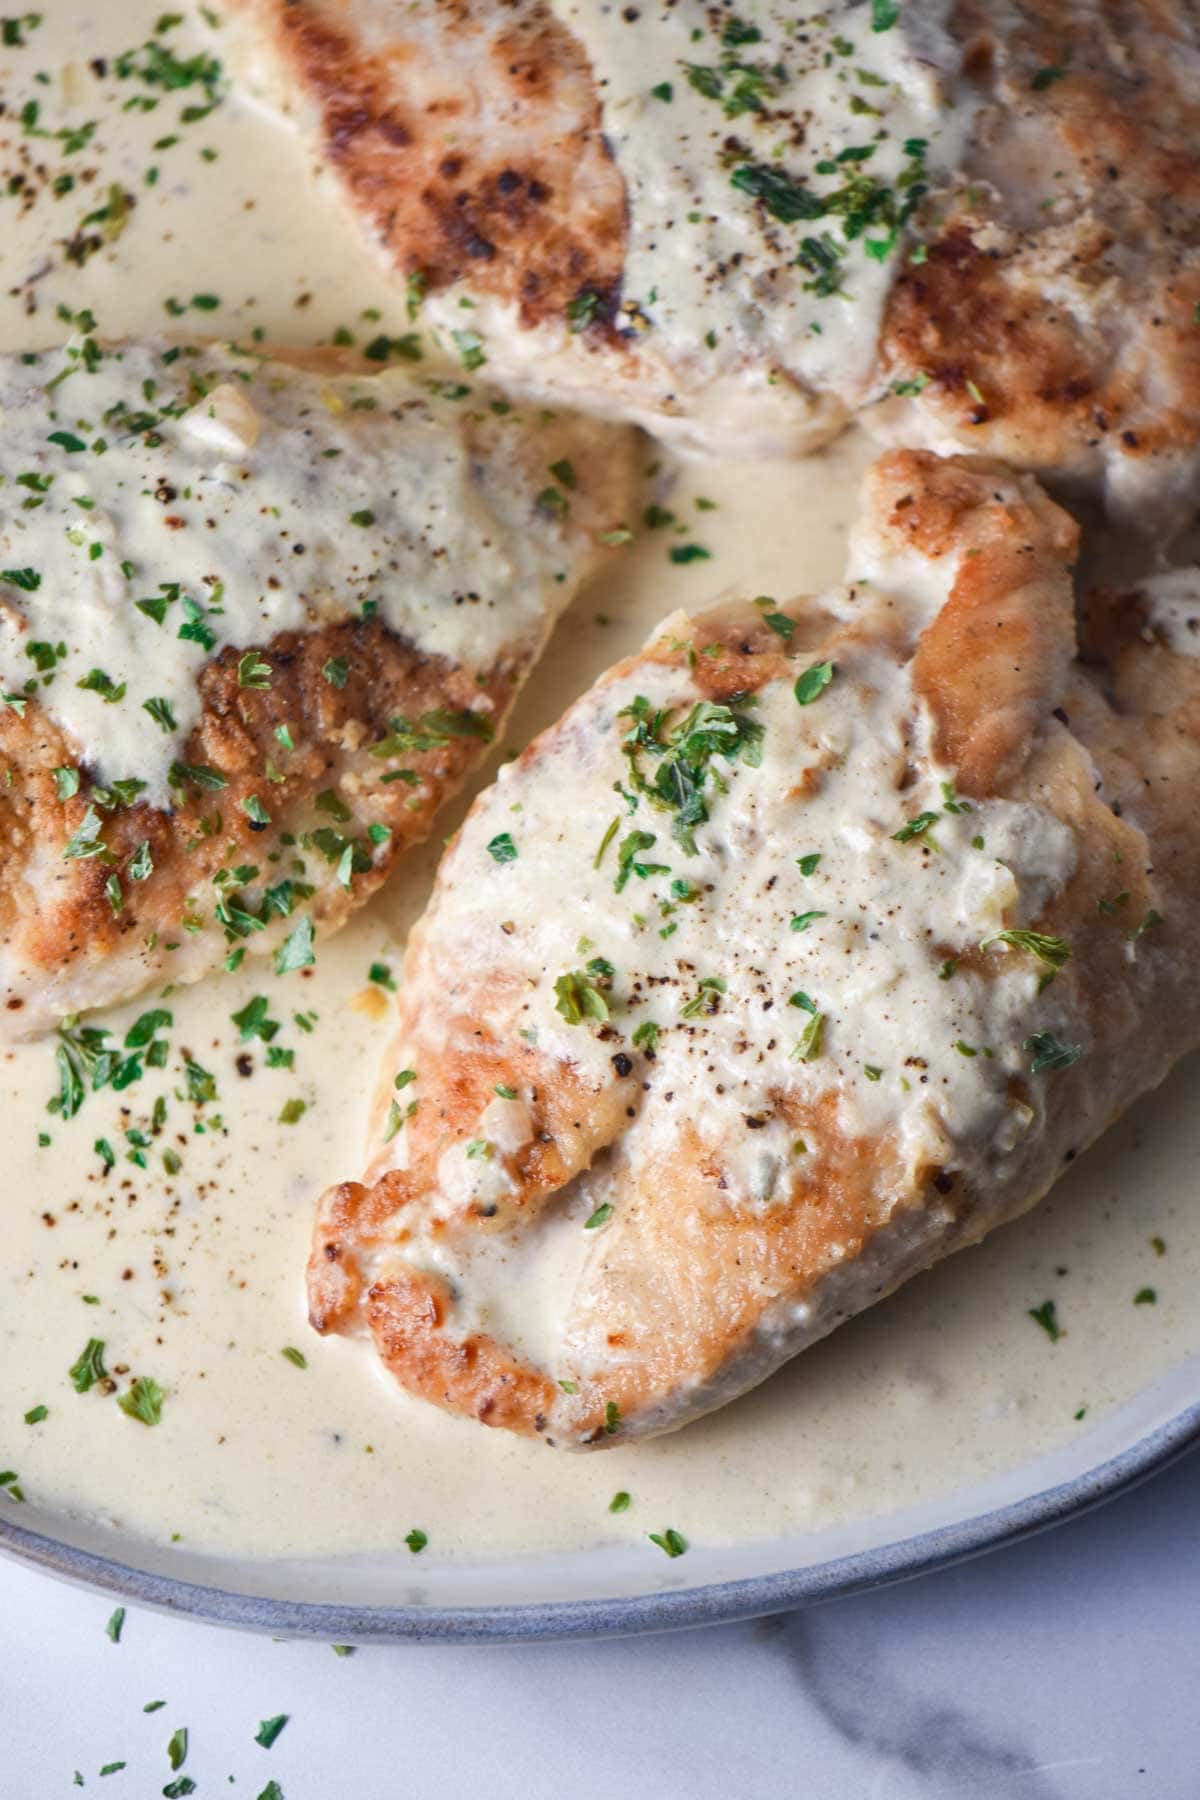 Three chicken breasts on a plate with sauce and parsley.